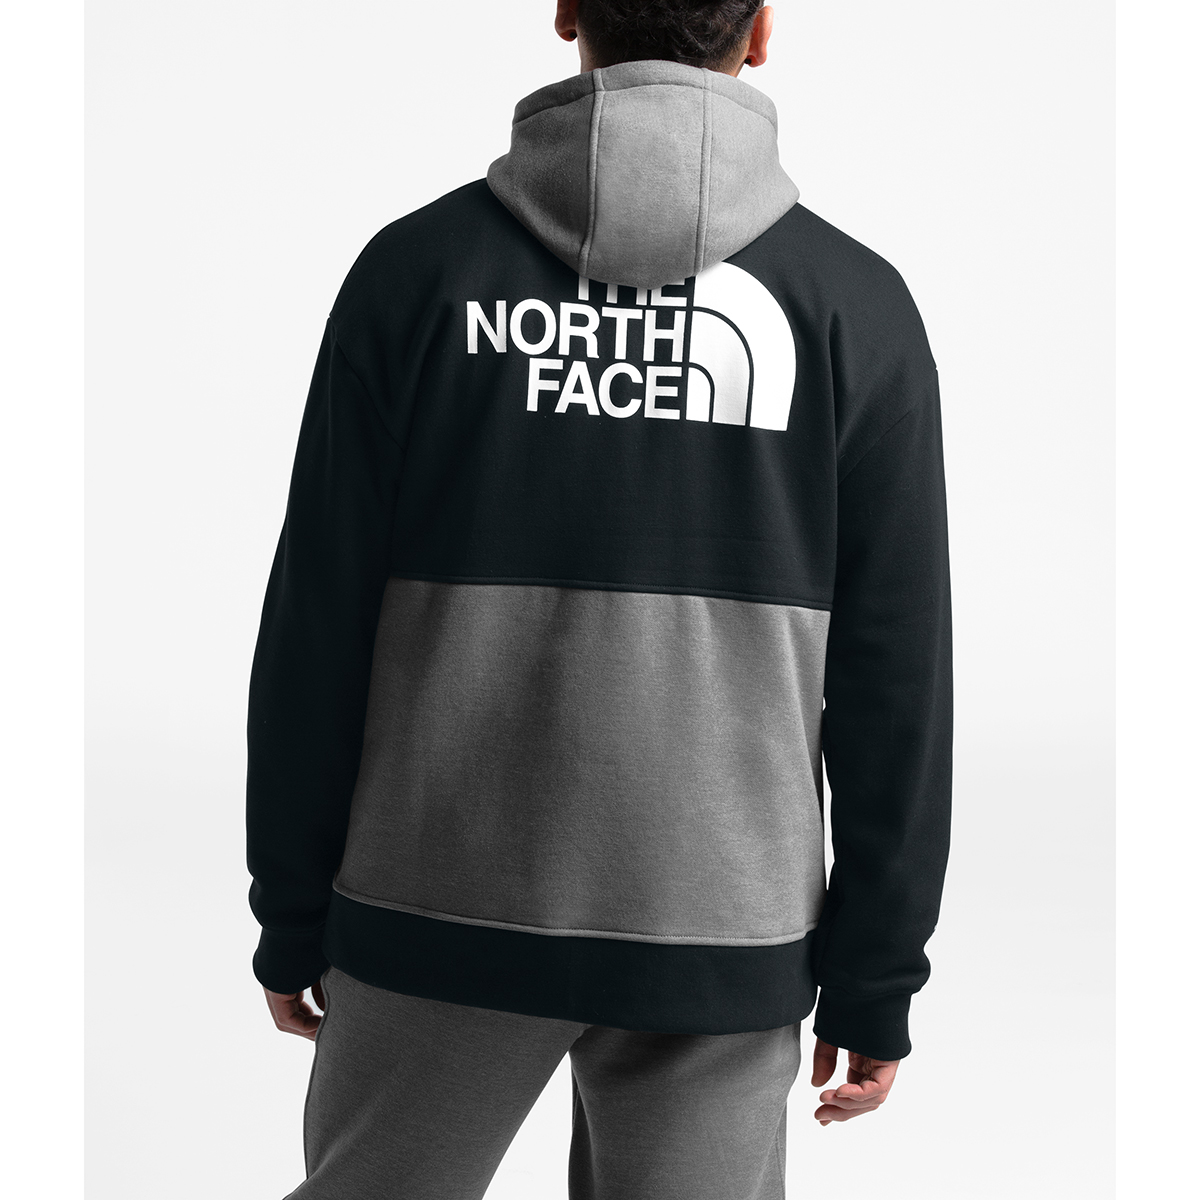 420b Grey Color Men's Travel and Sport Wear Clothing Sweater Hoodie The  North Face Masked Clothing - China Tactical Coat and Jacket price